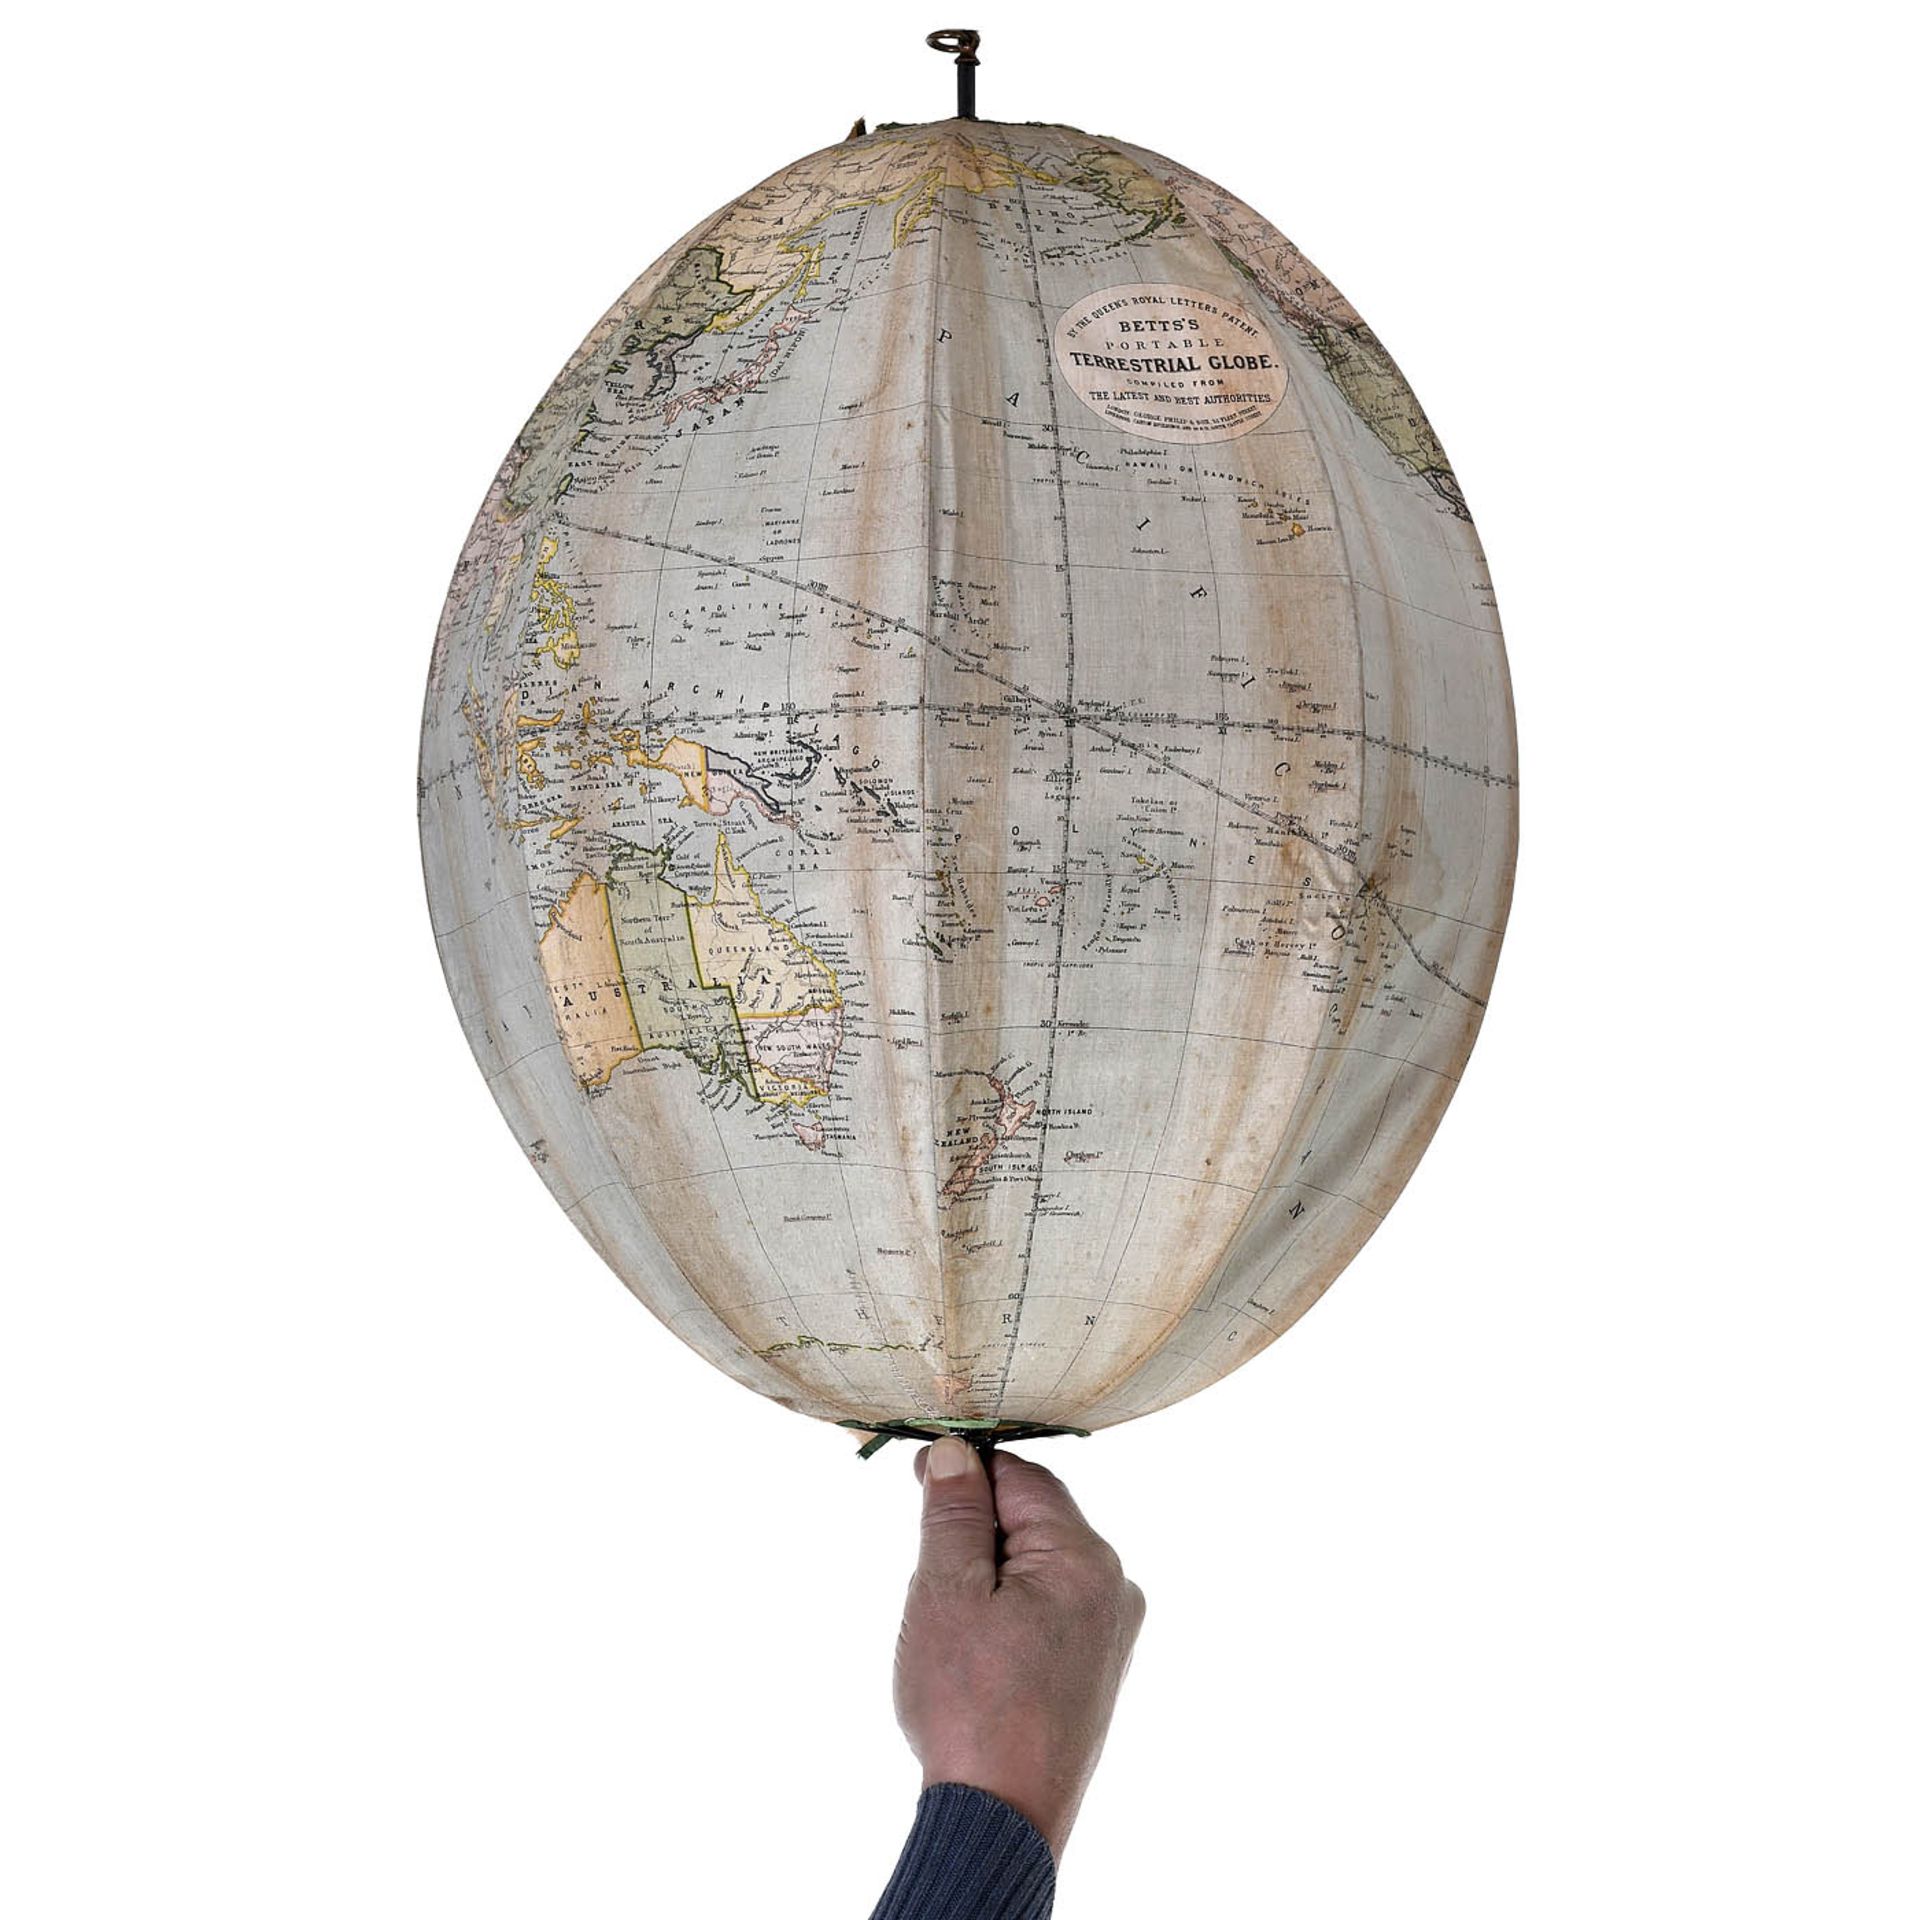 Bett's 16-Inch Collapsible Terrestrial Globe, c. 1880 - Image 3 of 5